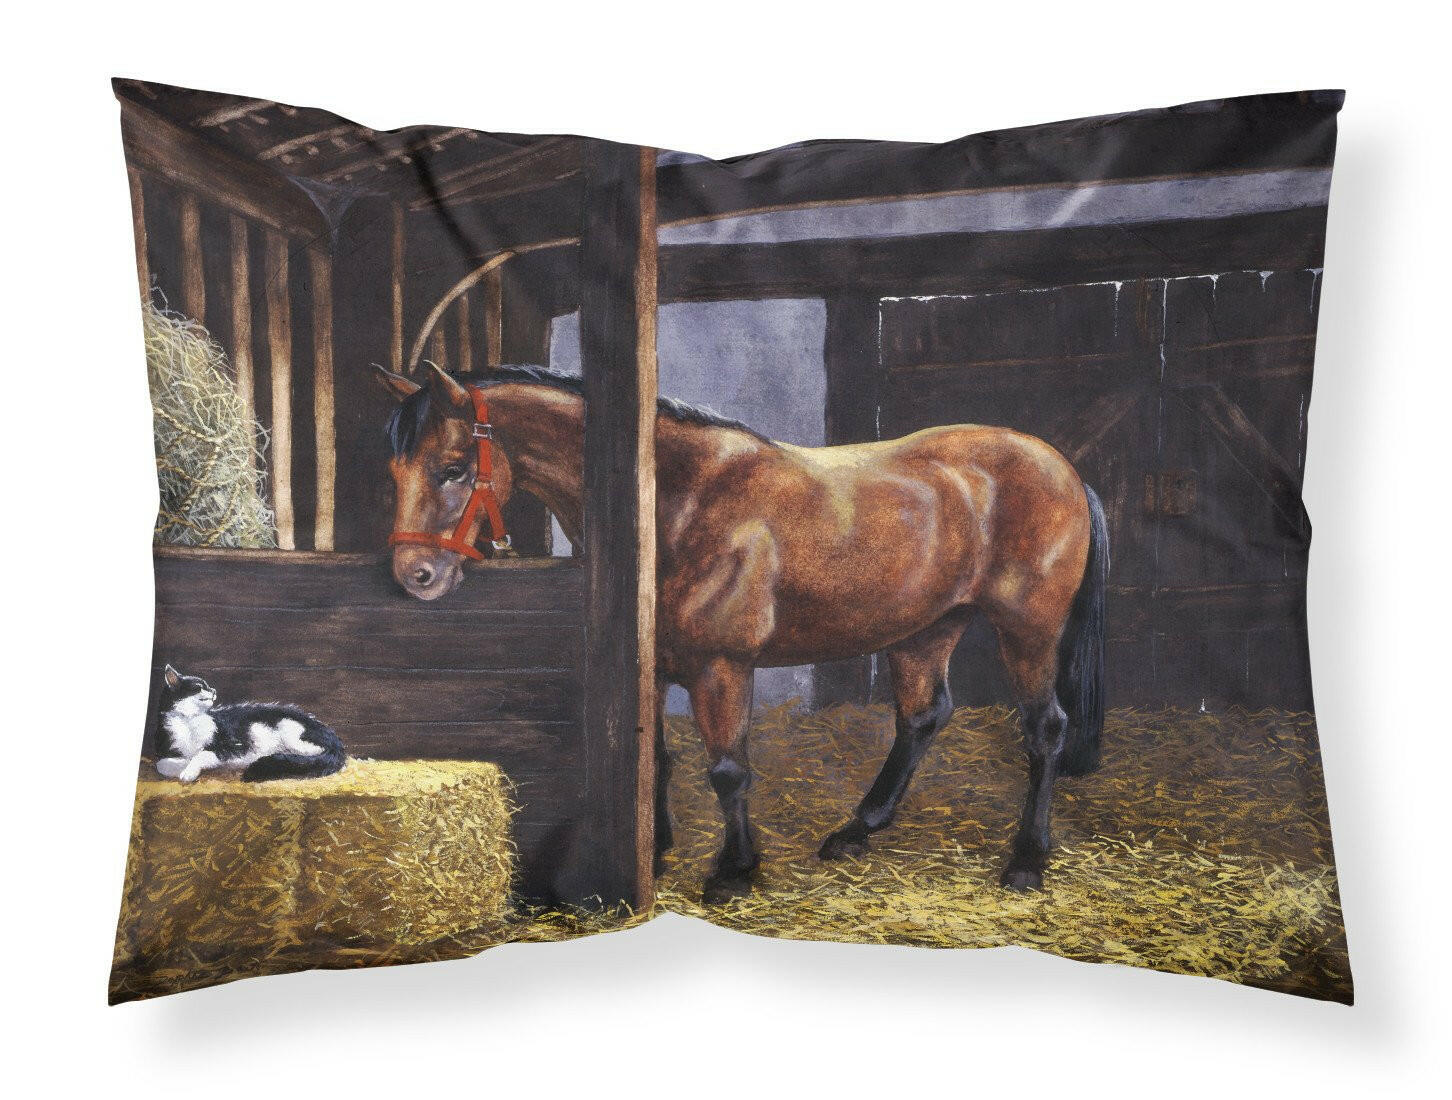 Horse In Stable with Cat Fabric Standard Pillowcase BDBA0295PILLOWCASE by Caroline's Treasures